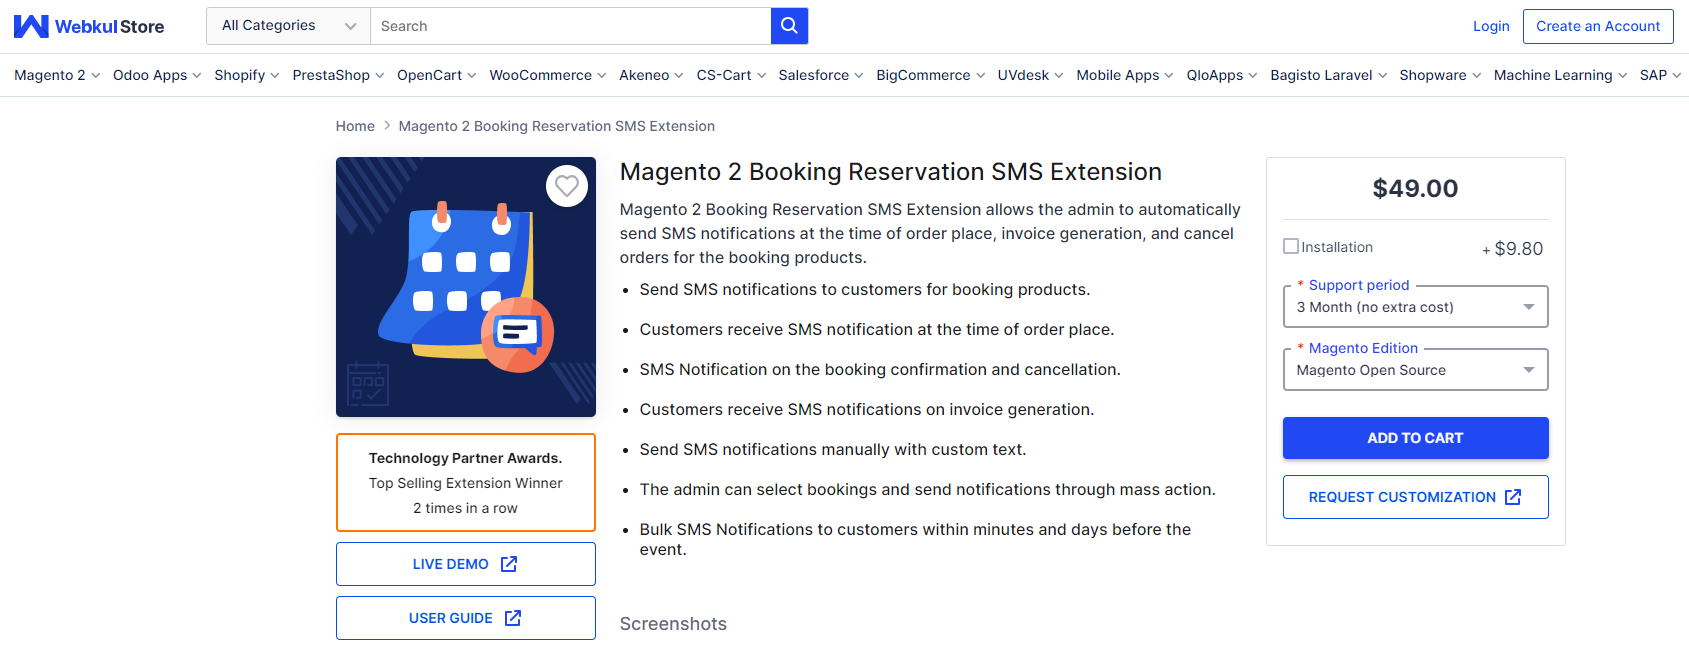 Booking Reservation SMS Extension for Magento 2 by Webkul